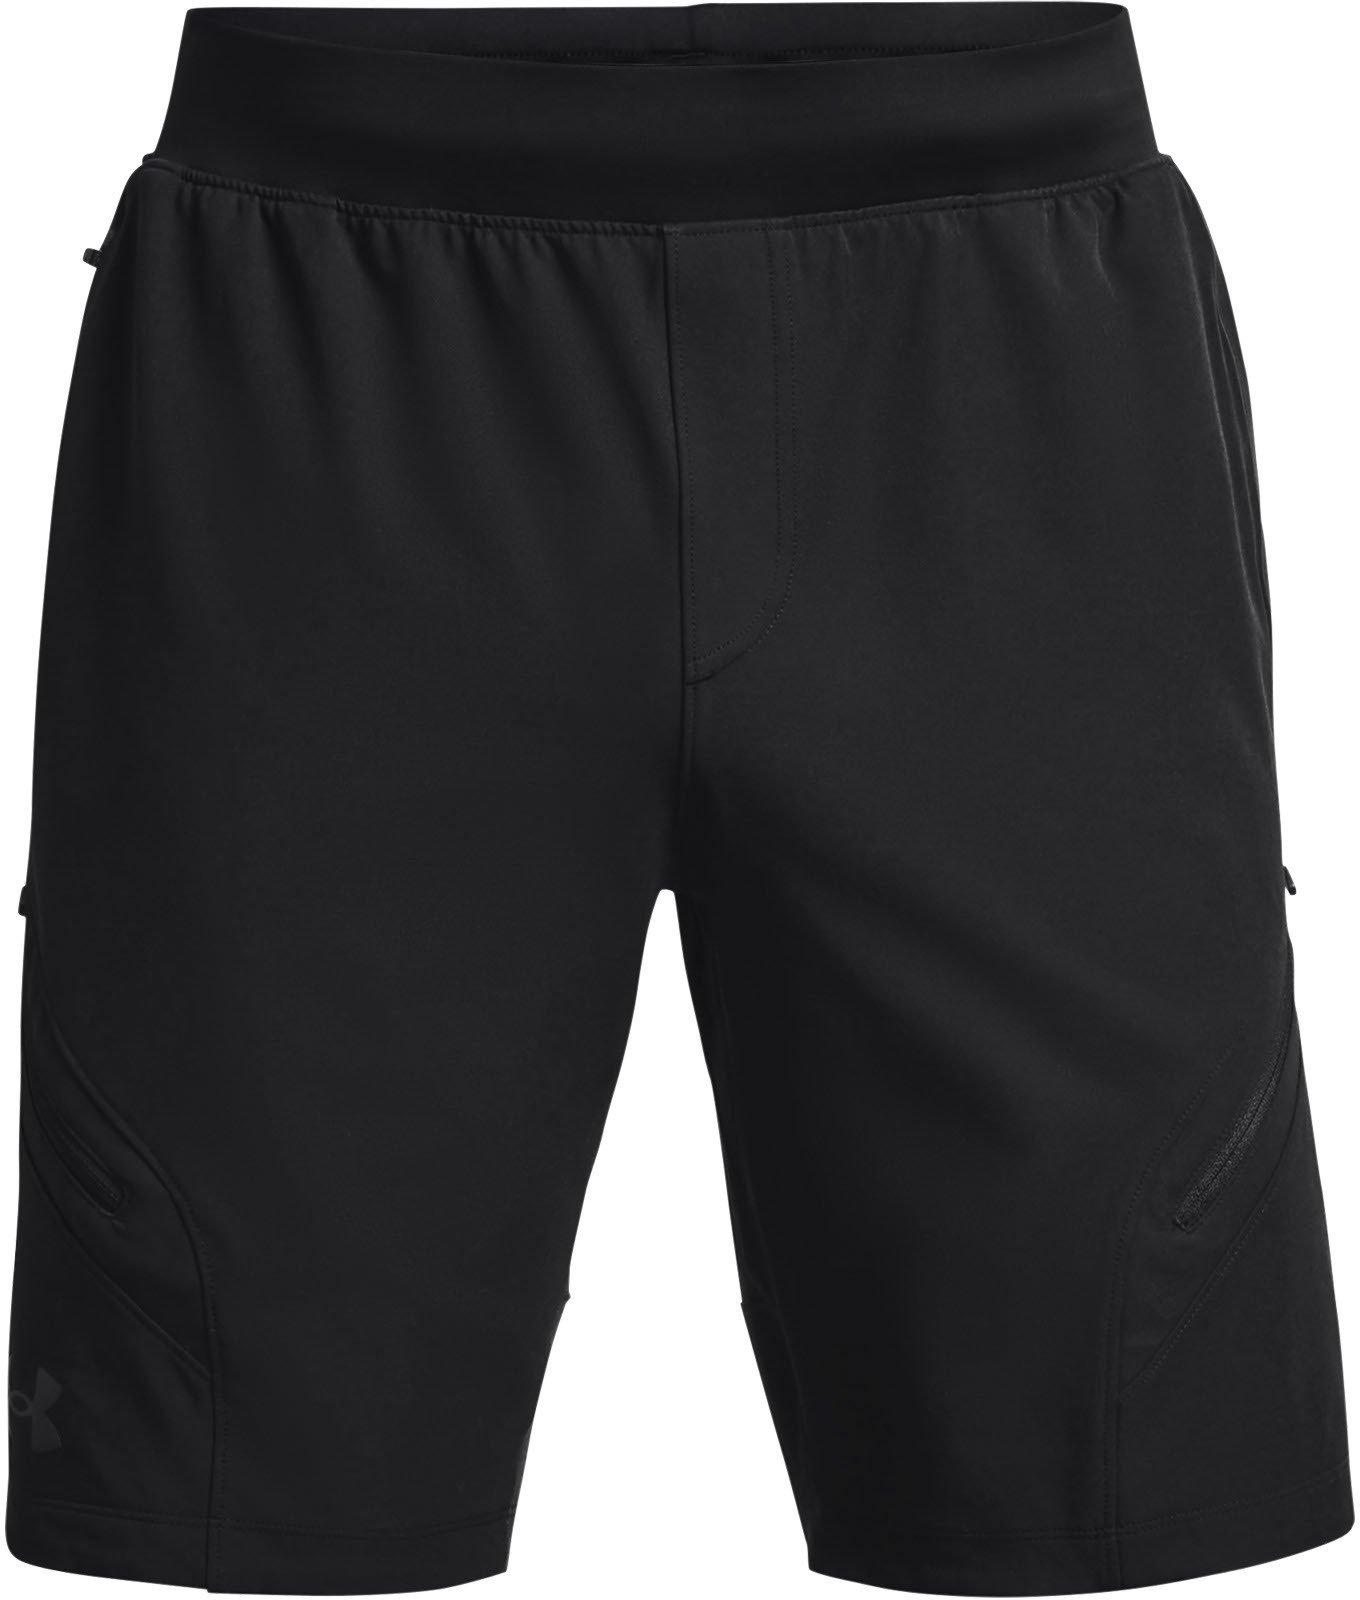 Under Armour Unstoppable Cargo Shorts-BLK XL